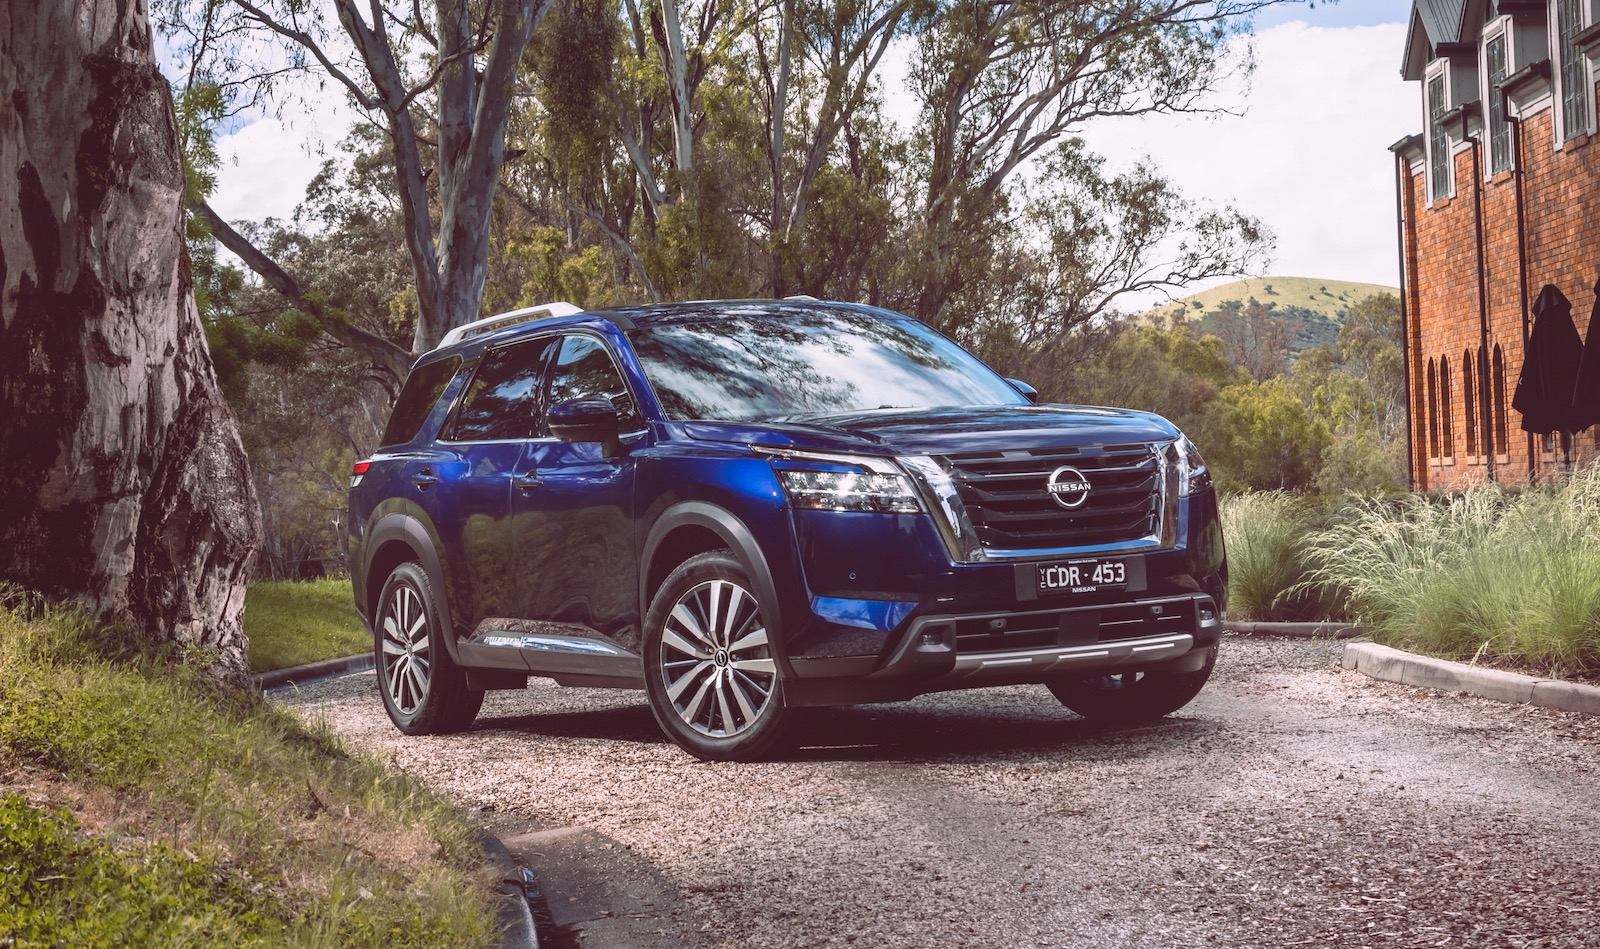 2023 Nissan Pathfinder now on sale in Australia, priced from $54,190